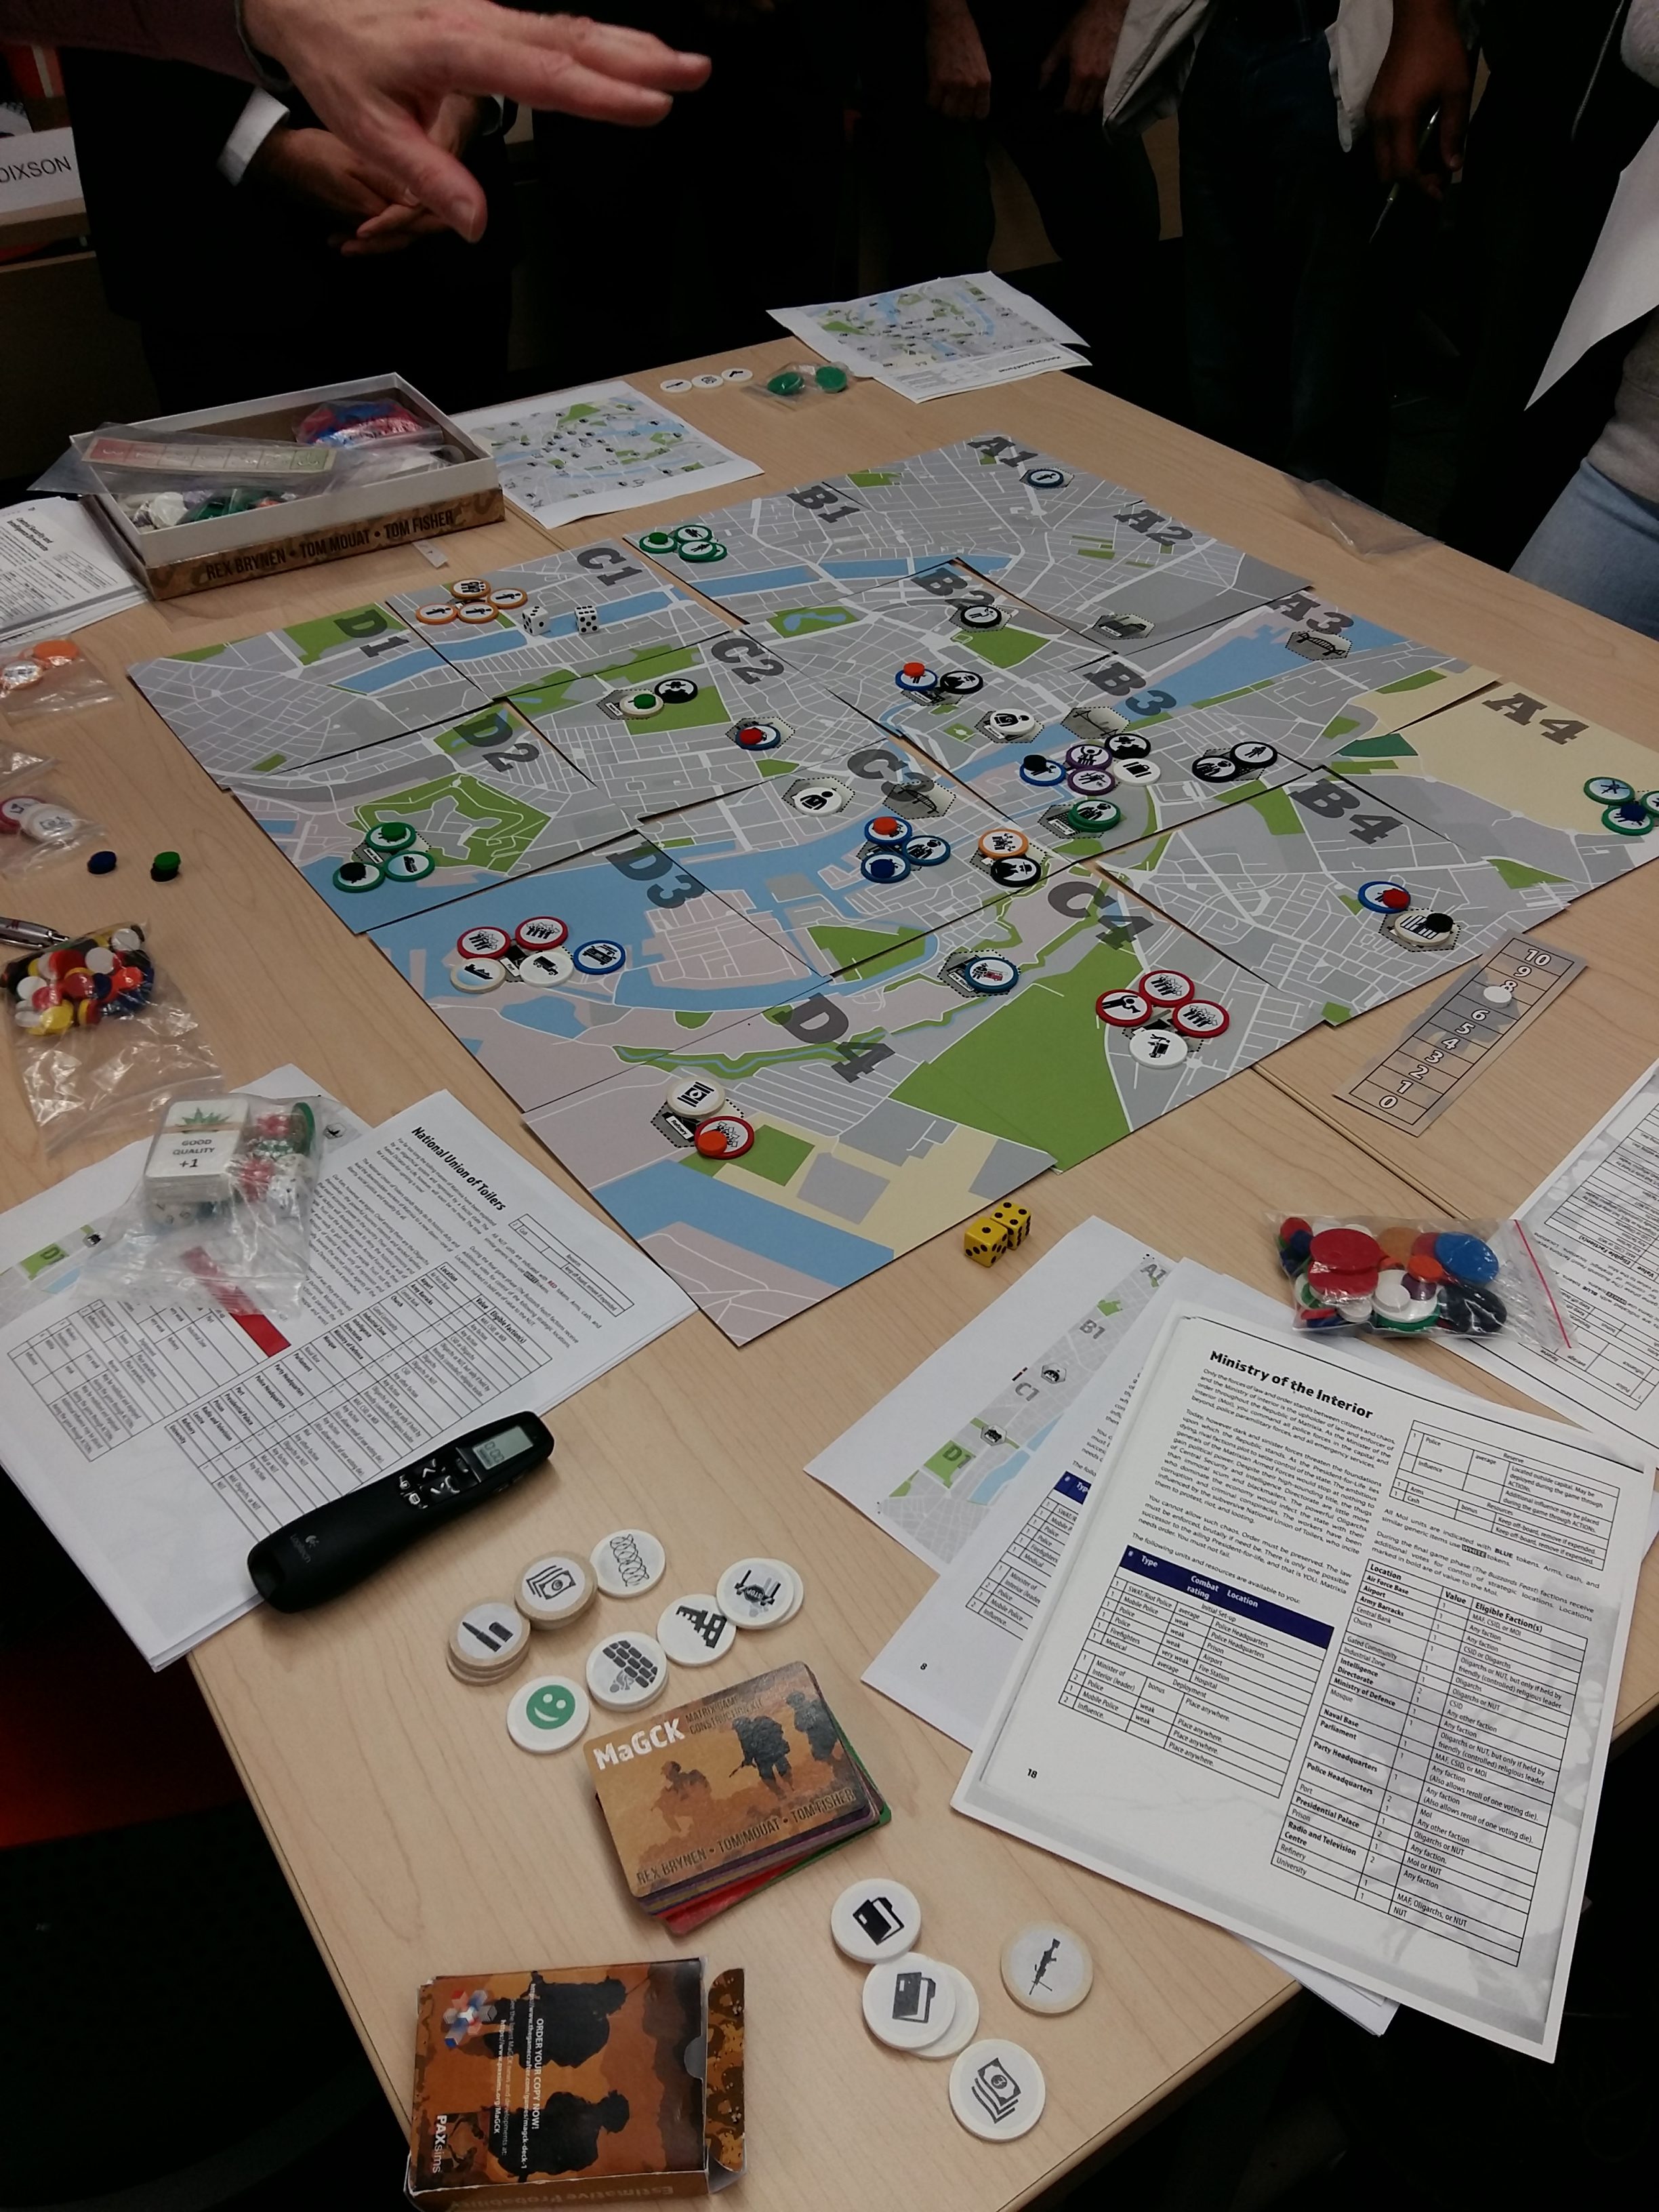 “Serious Games for Policy Analysis and Capacity-Building” Workshop Review